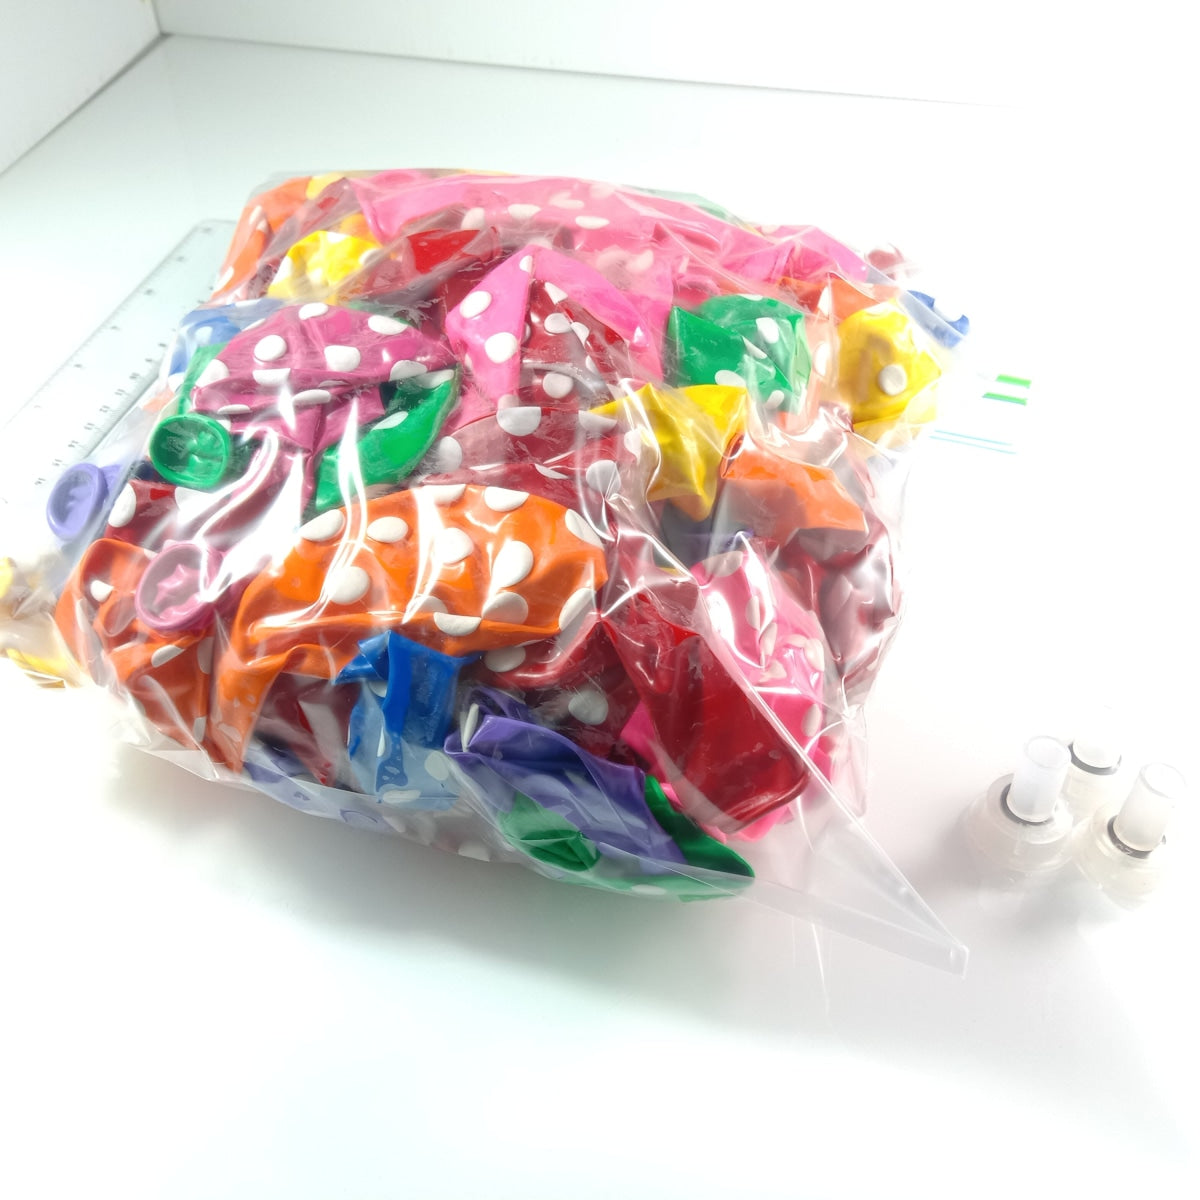 Large Bag Of 12 Extra Polka Dot Balloons High Quality Rich Colours Including Hygiene Blowers